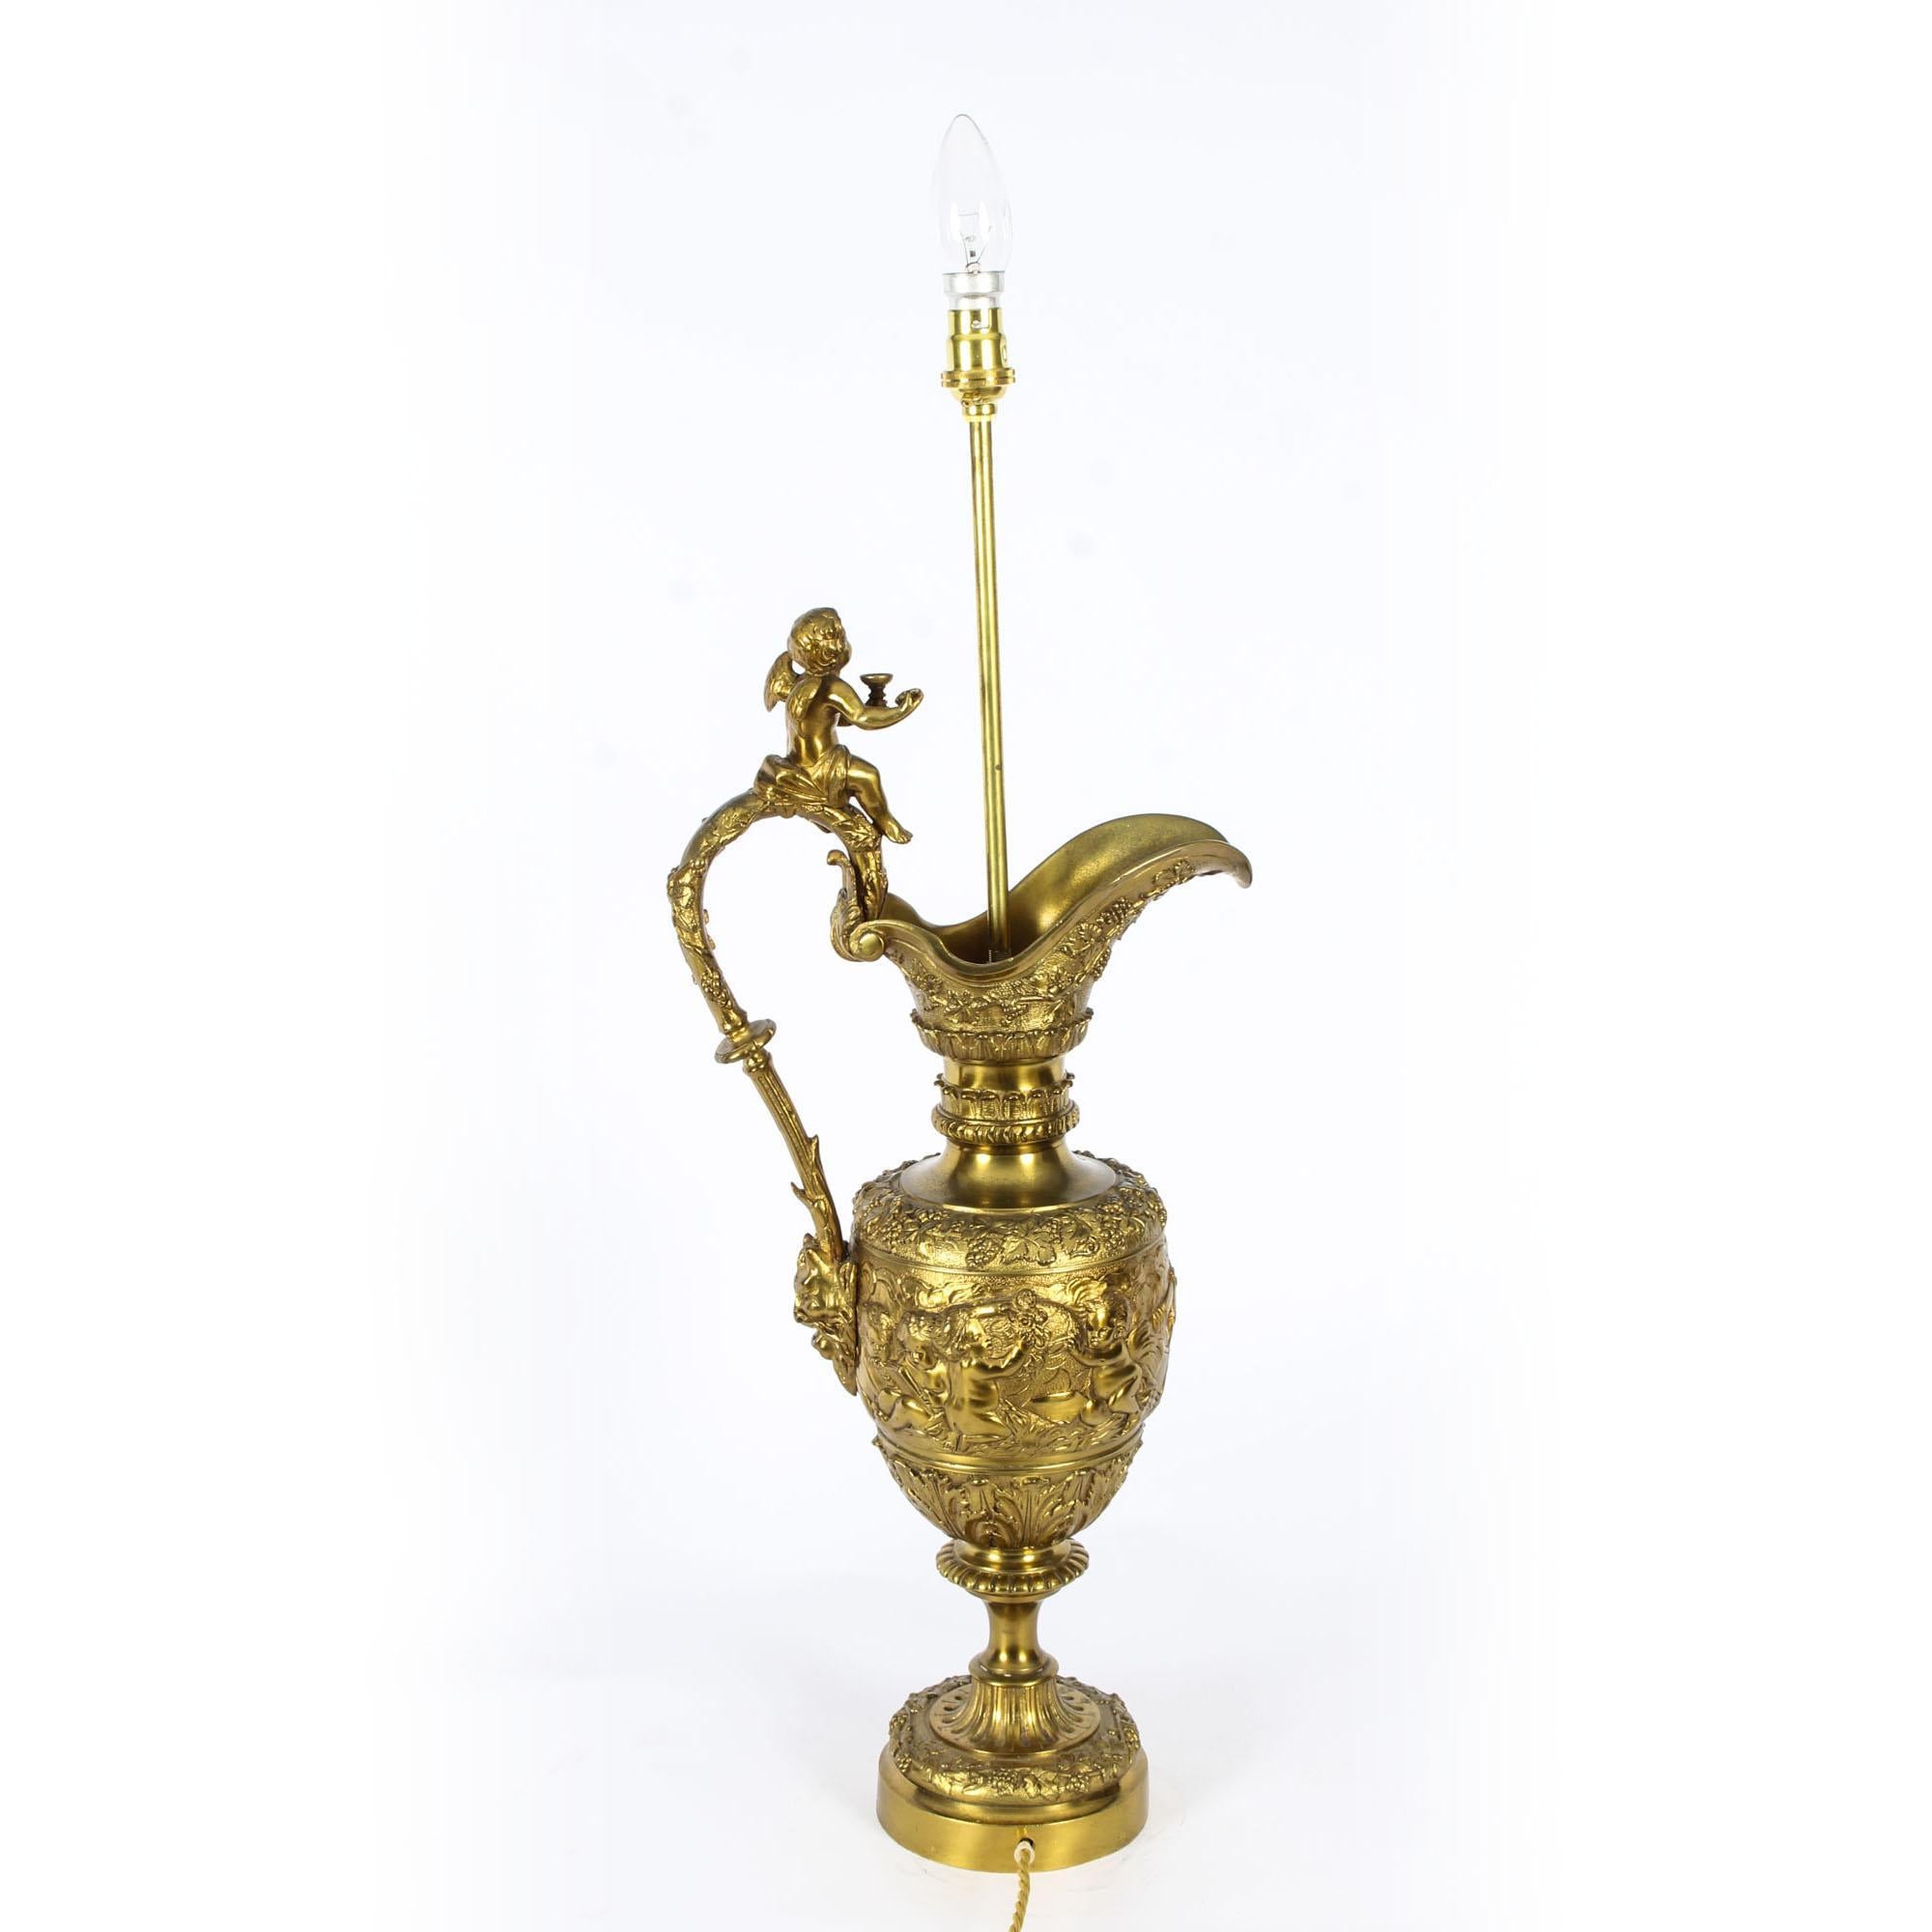 This is a truly superb large French antique Renaissance Revival ormolu table lamp, circa 1870 in date.

It is relief cast with grapevines, cherubs and acanthus leaves, the serpentine handle rising to a seated winged amorini and descending to a